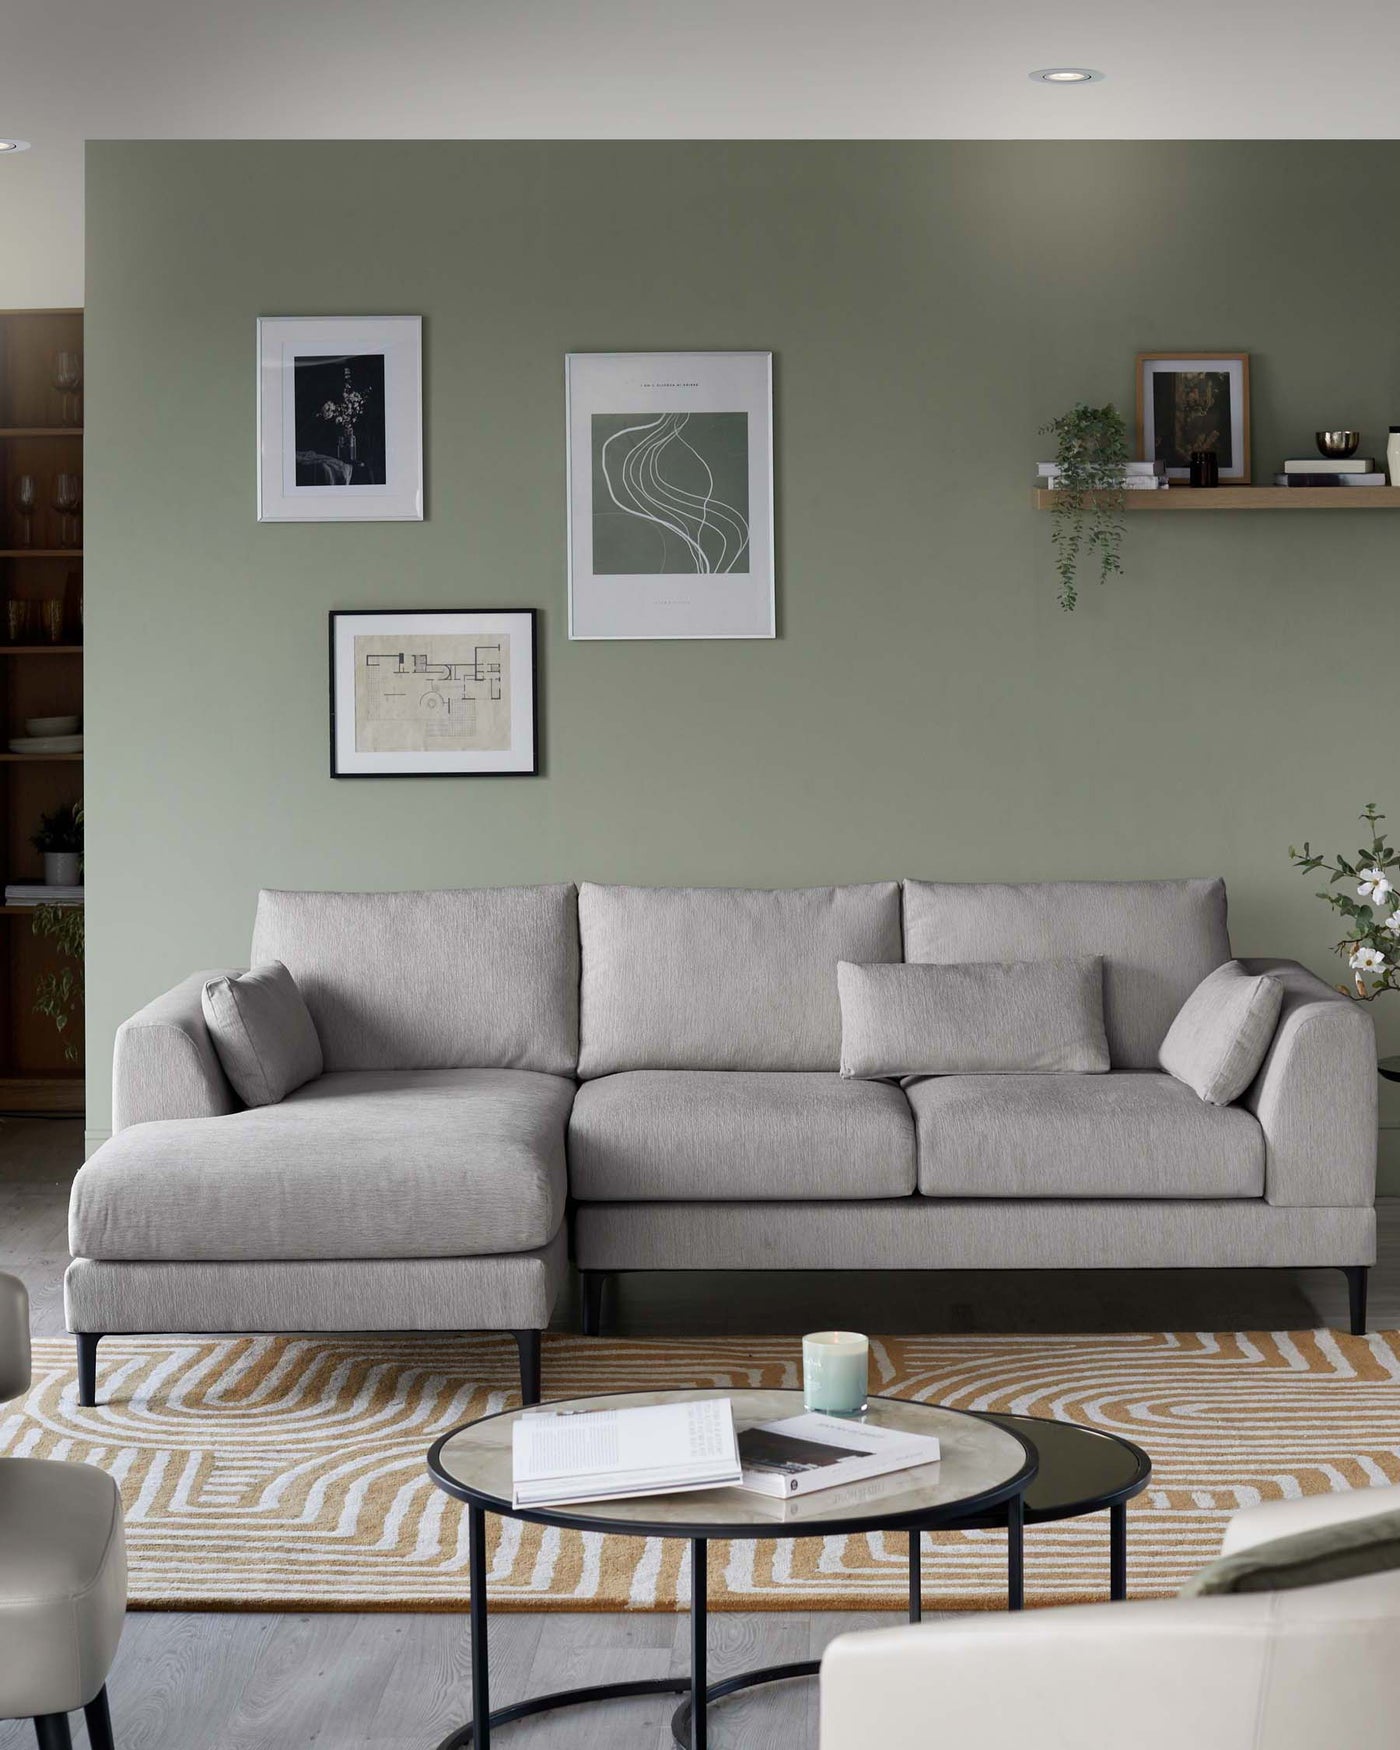 Modern living room with a light grey fabric L-shaped sectional sofa featuring plush back cushions and a chaise lounge on the left. In front of the sofa, there is a round, two-tiered coffee table with a black metal frame and glass tops. A beige and white patterned rug is beneath the coffee table and sofa. On the left, part of a light-coloured armchair is visible. The room is accessorized with framed wall art and a wooden wall shelf with decorative items.